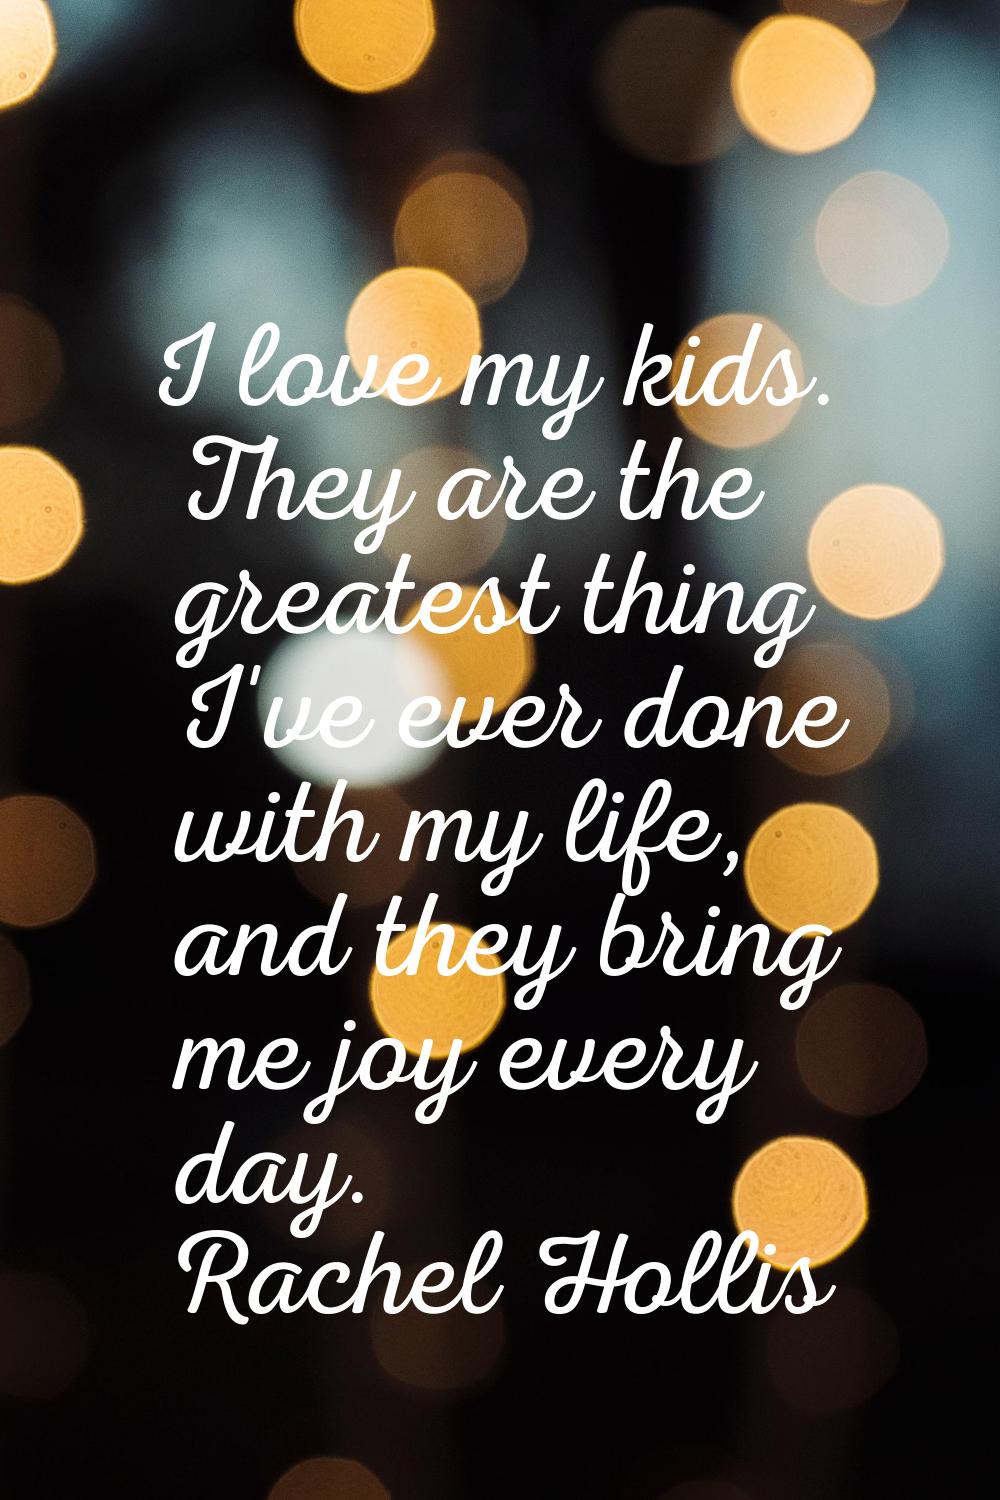 I love my kids. They are the greatest thing I've ever done with my life, and they bring me joy ever